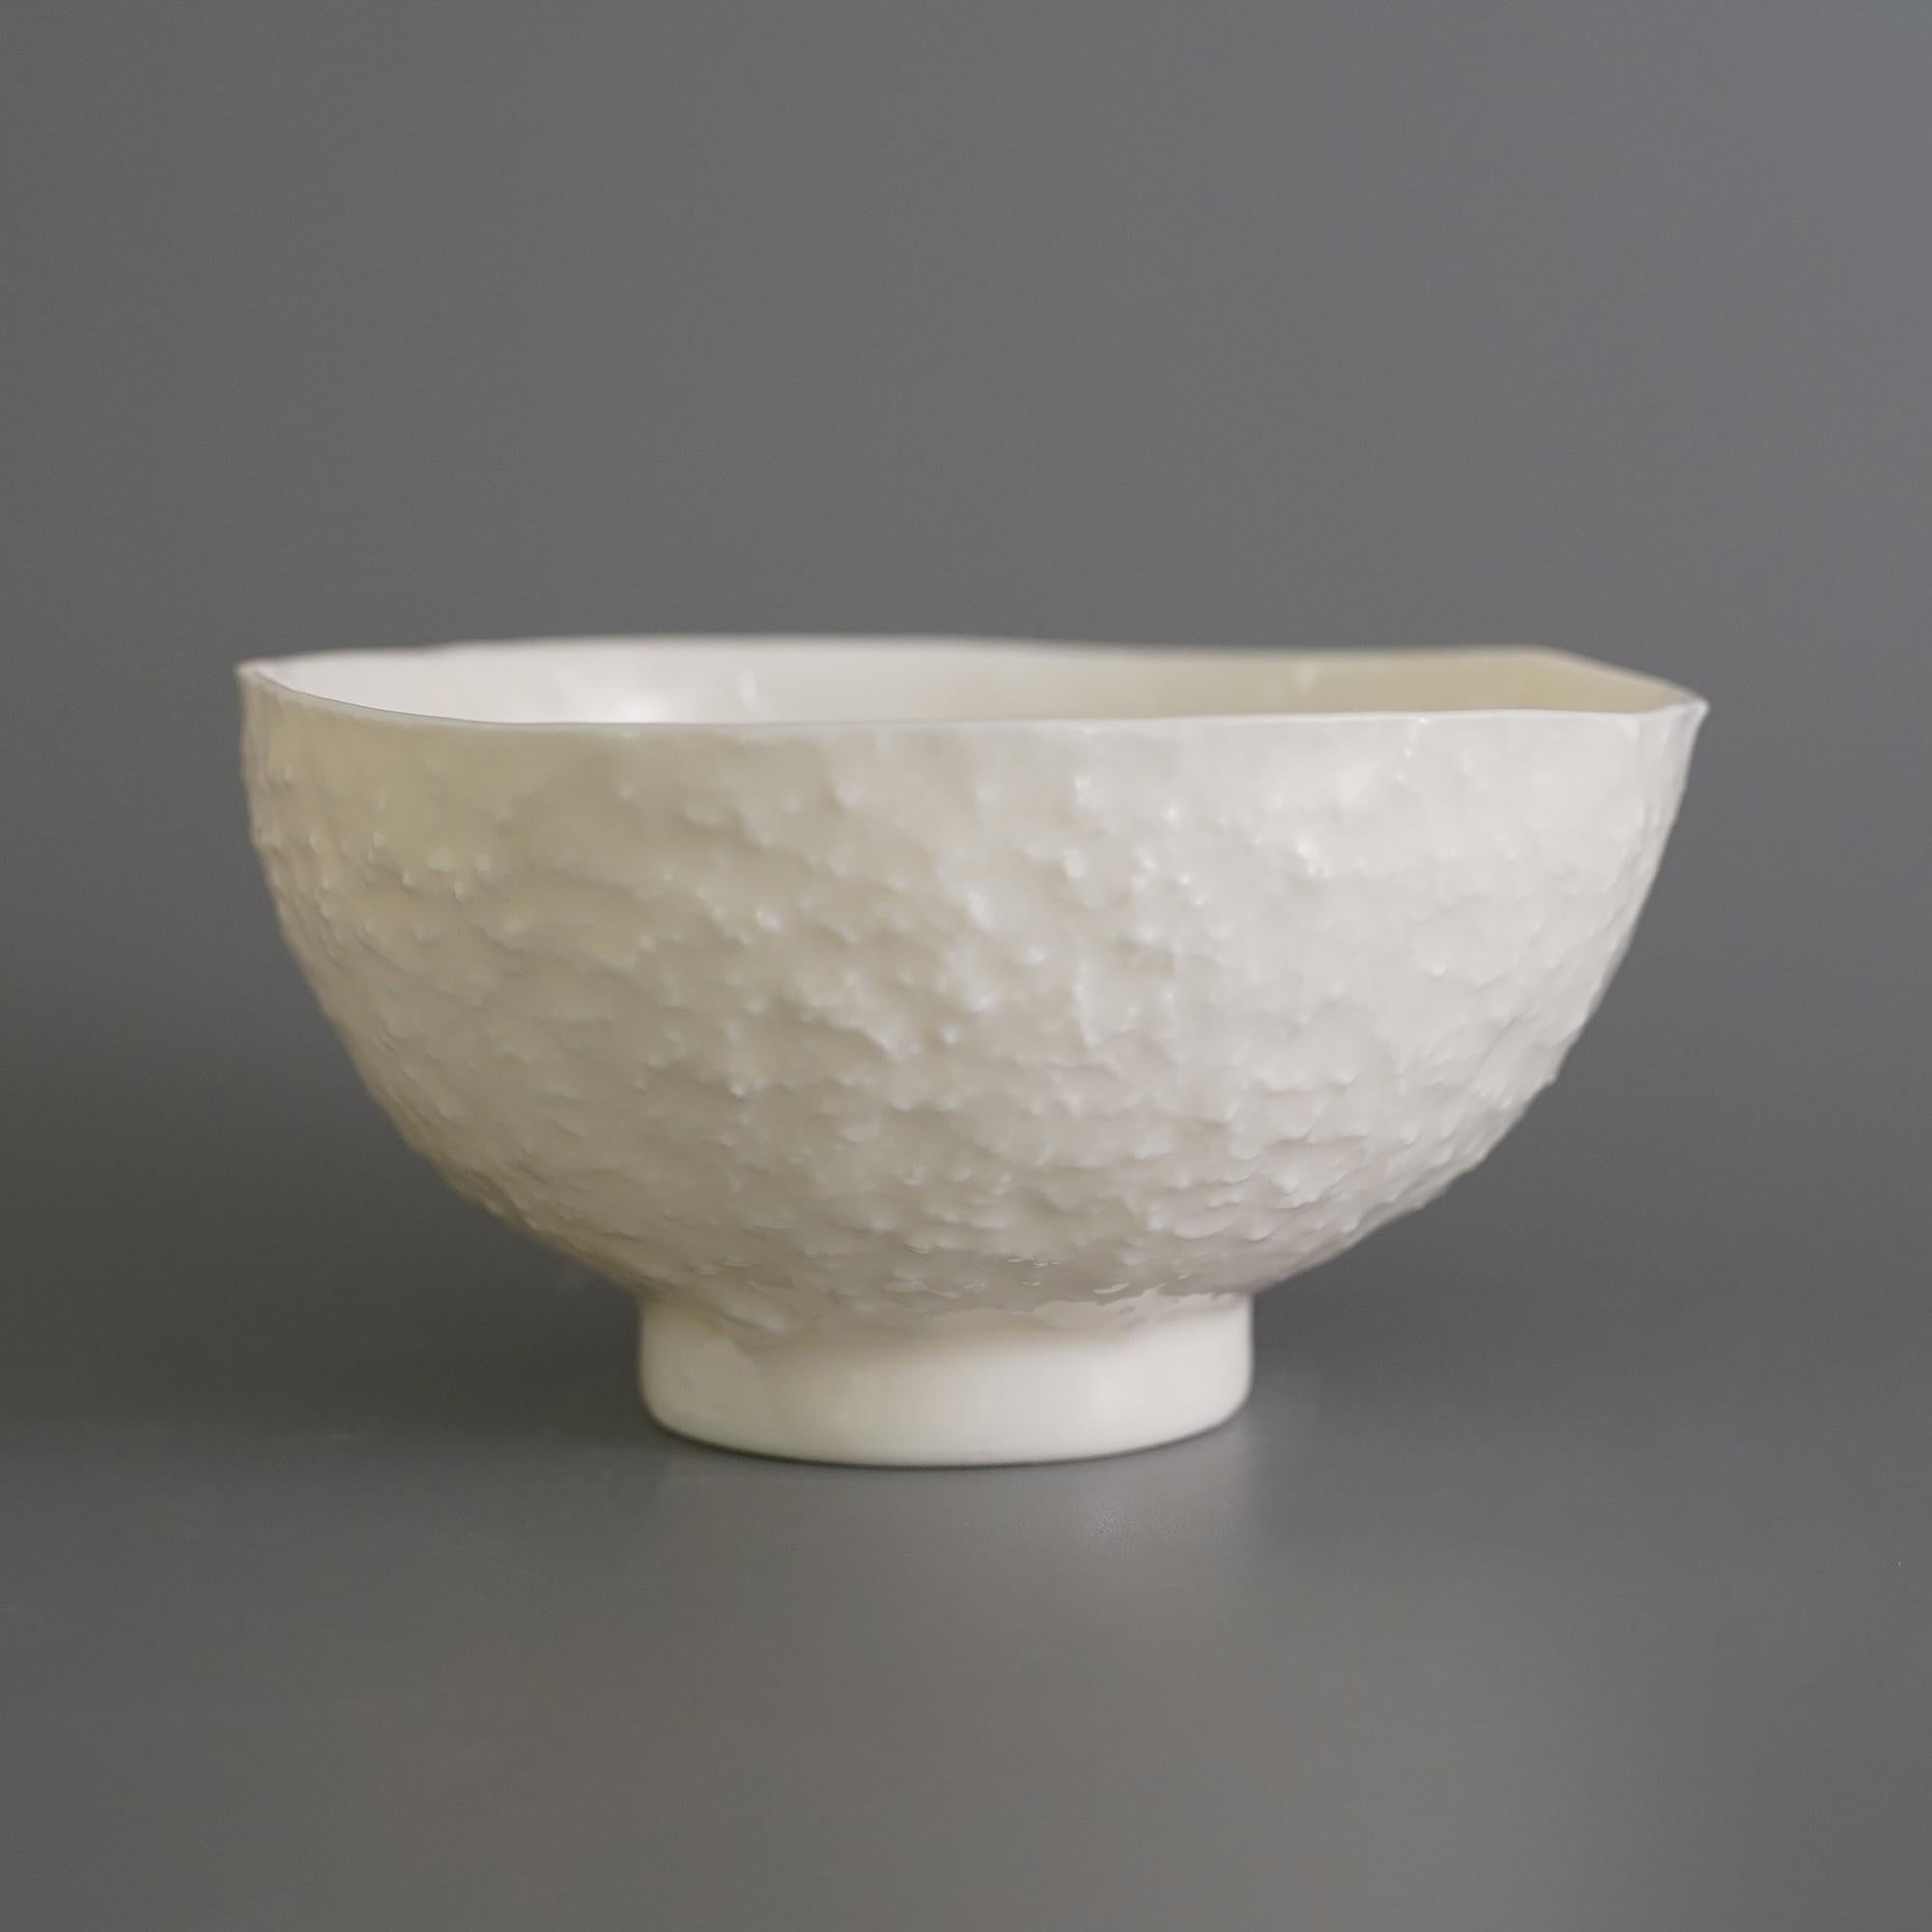 Set of 4 melt bowl by Studio Cúze.
Dimensions: W 12.5 x H 5.5 cm.
Materials: ceramic.

The Melt Bowl is entirely white and has been given a unique shape and structure. Regarding the silhouette, each bowl is fundamentally different, because the